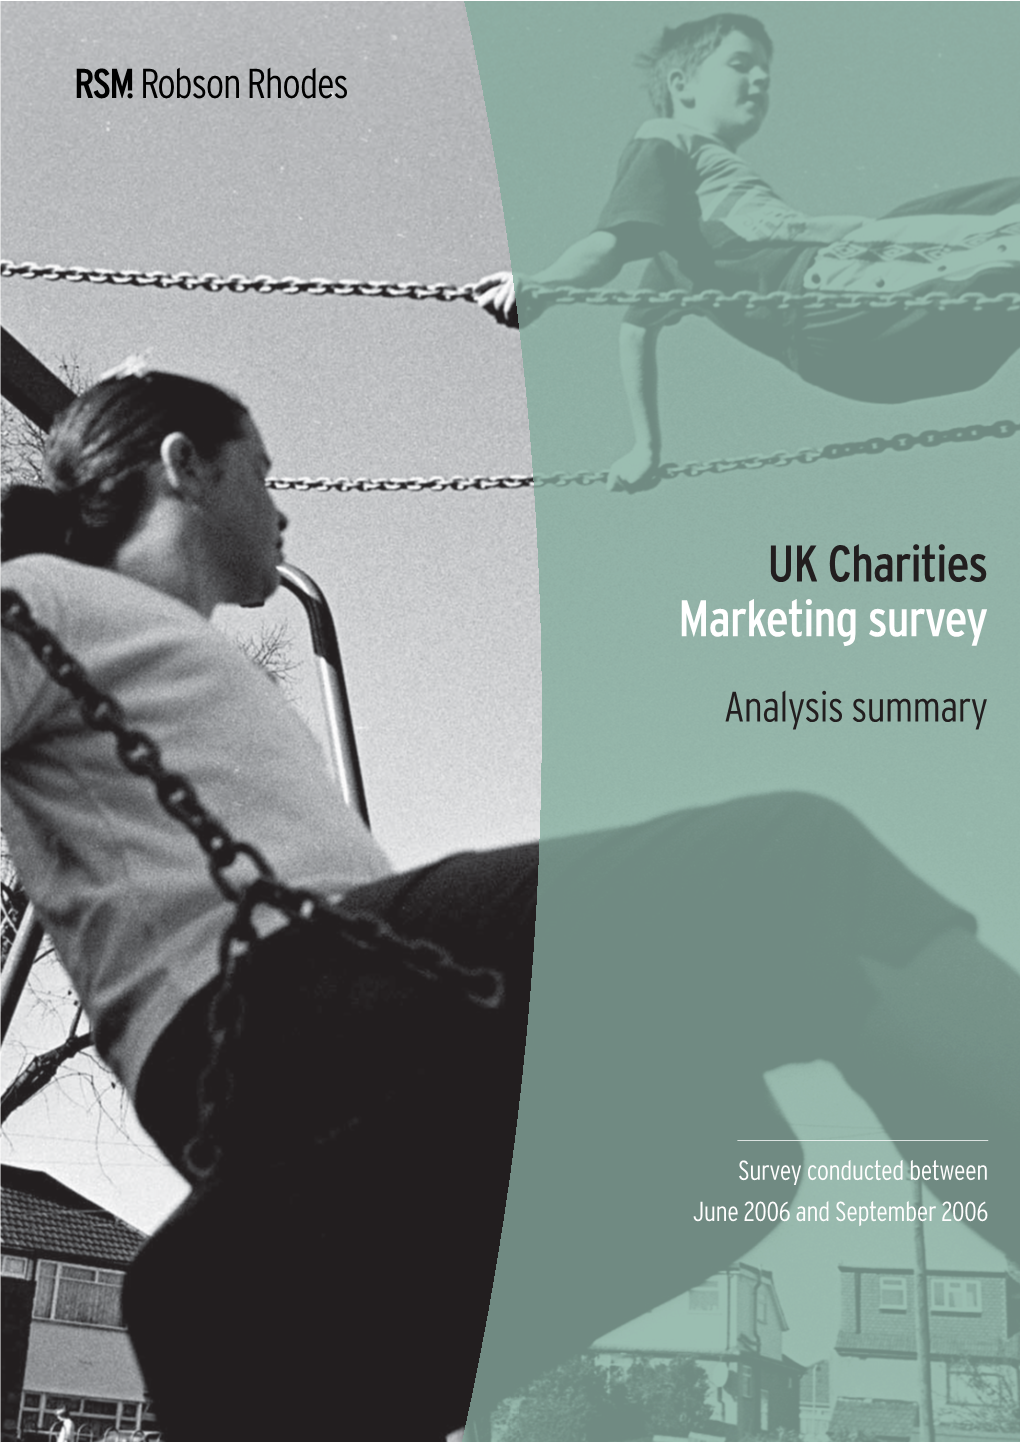 Charity Marketing Effectiveness Report.Indd